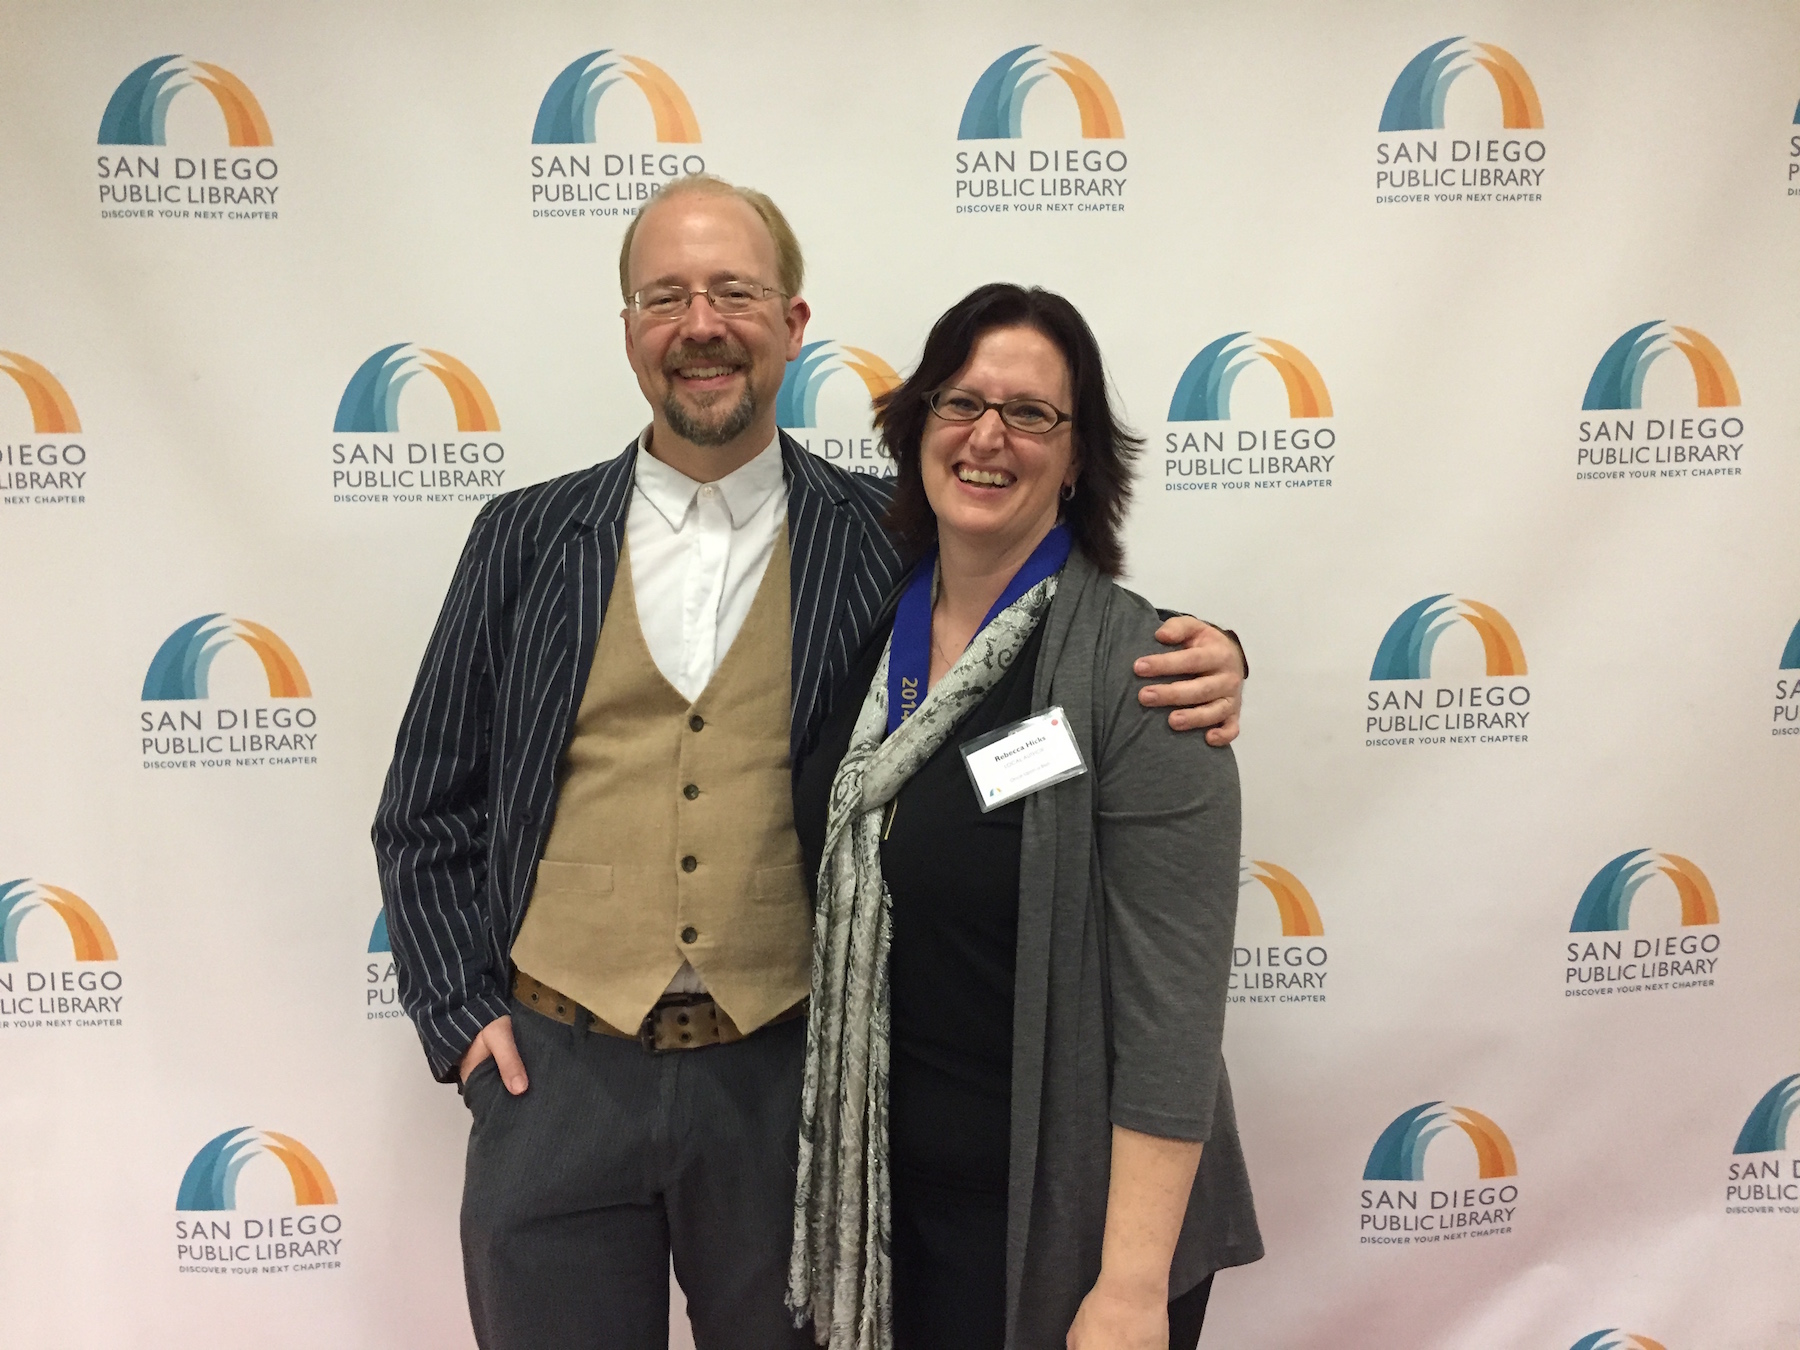 James and Rebecca Hicks pose for a photograph at the 2015 San Diego Public Library Local Author Reception